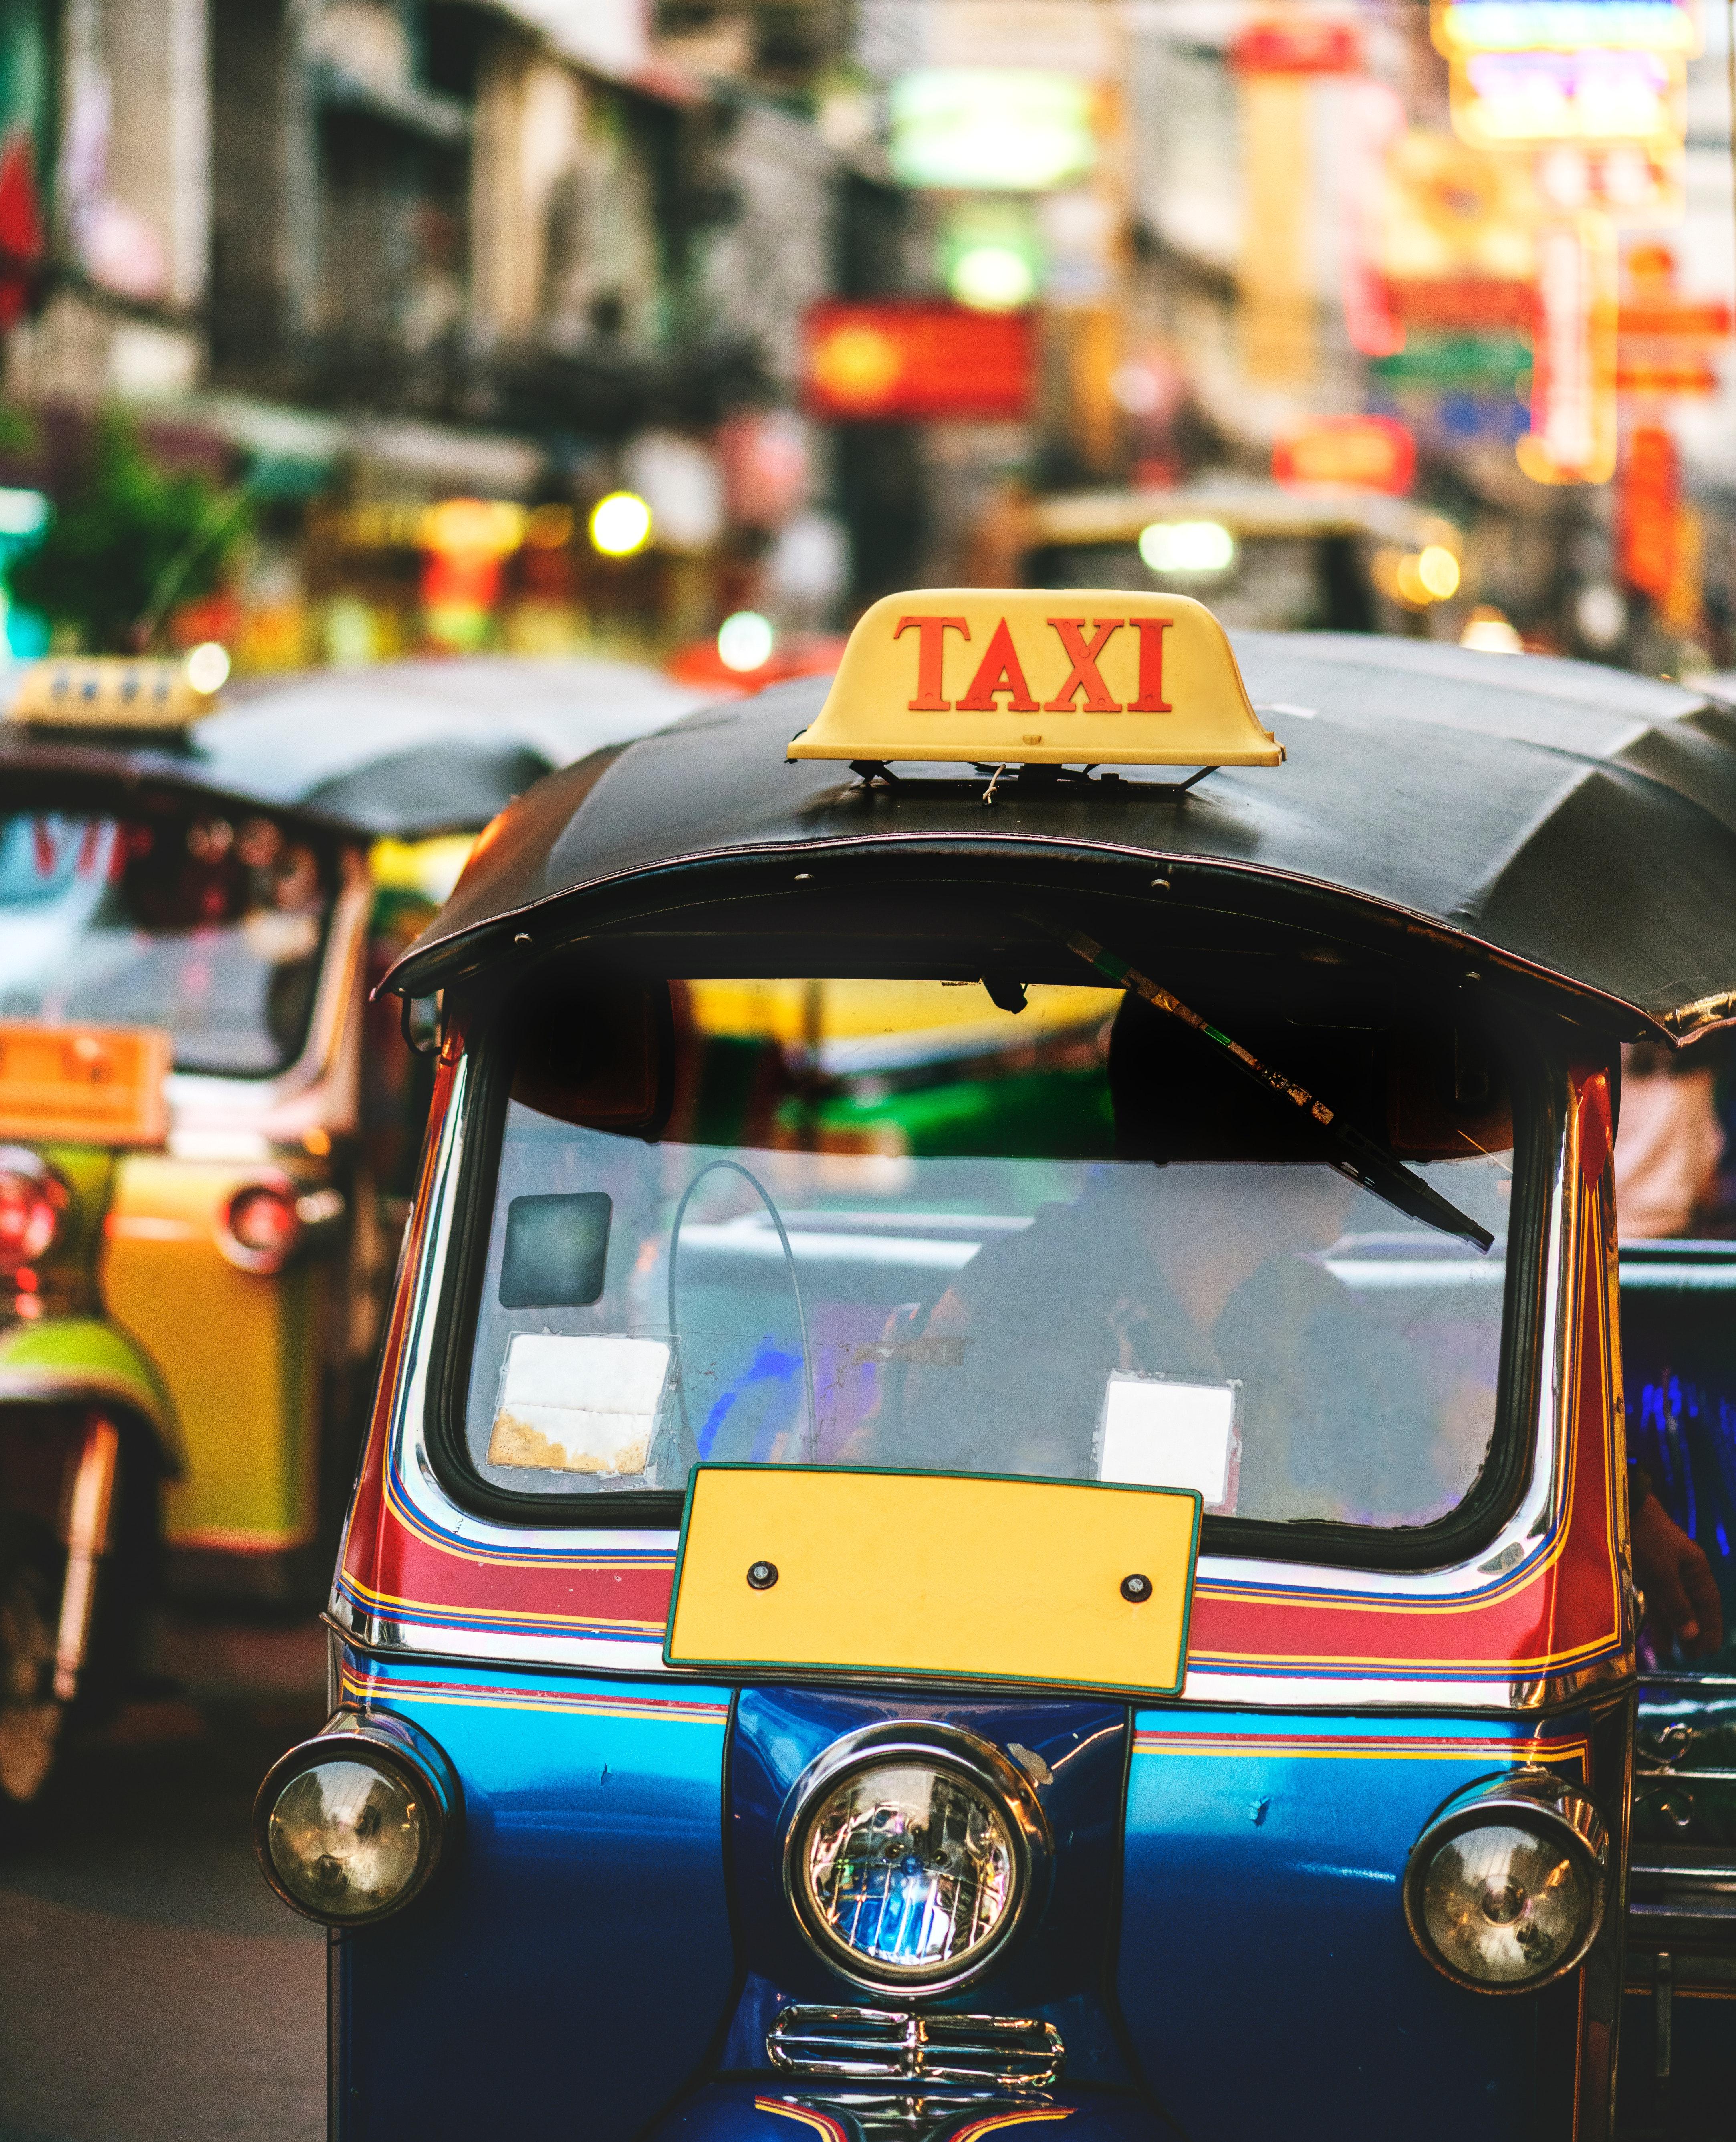 Selective Focus Photography Auto Rickshaws Taxis in Traffic · Free